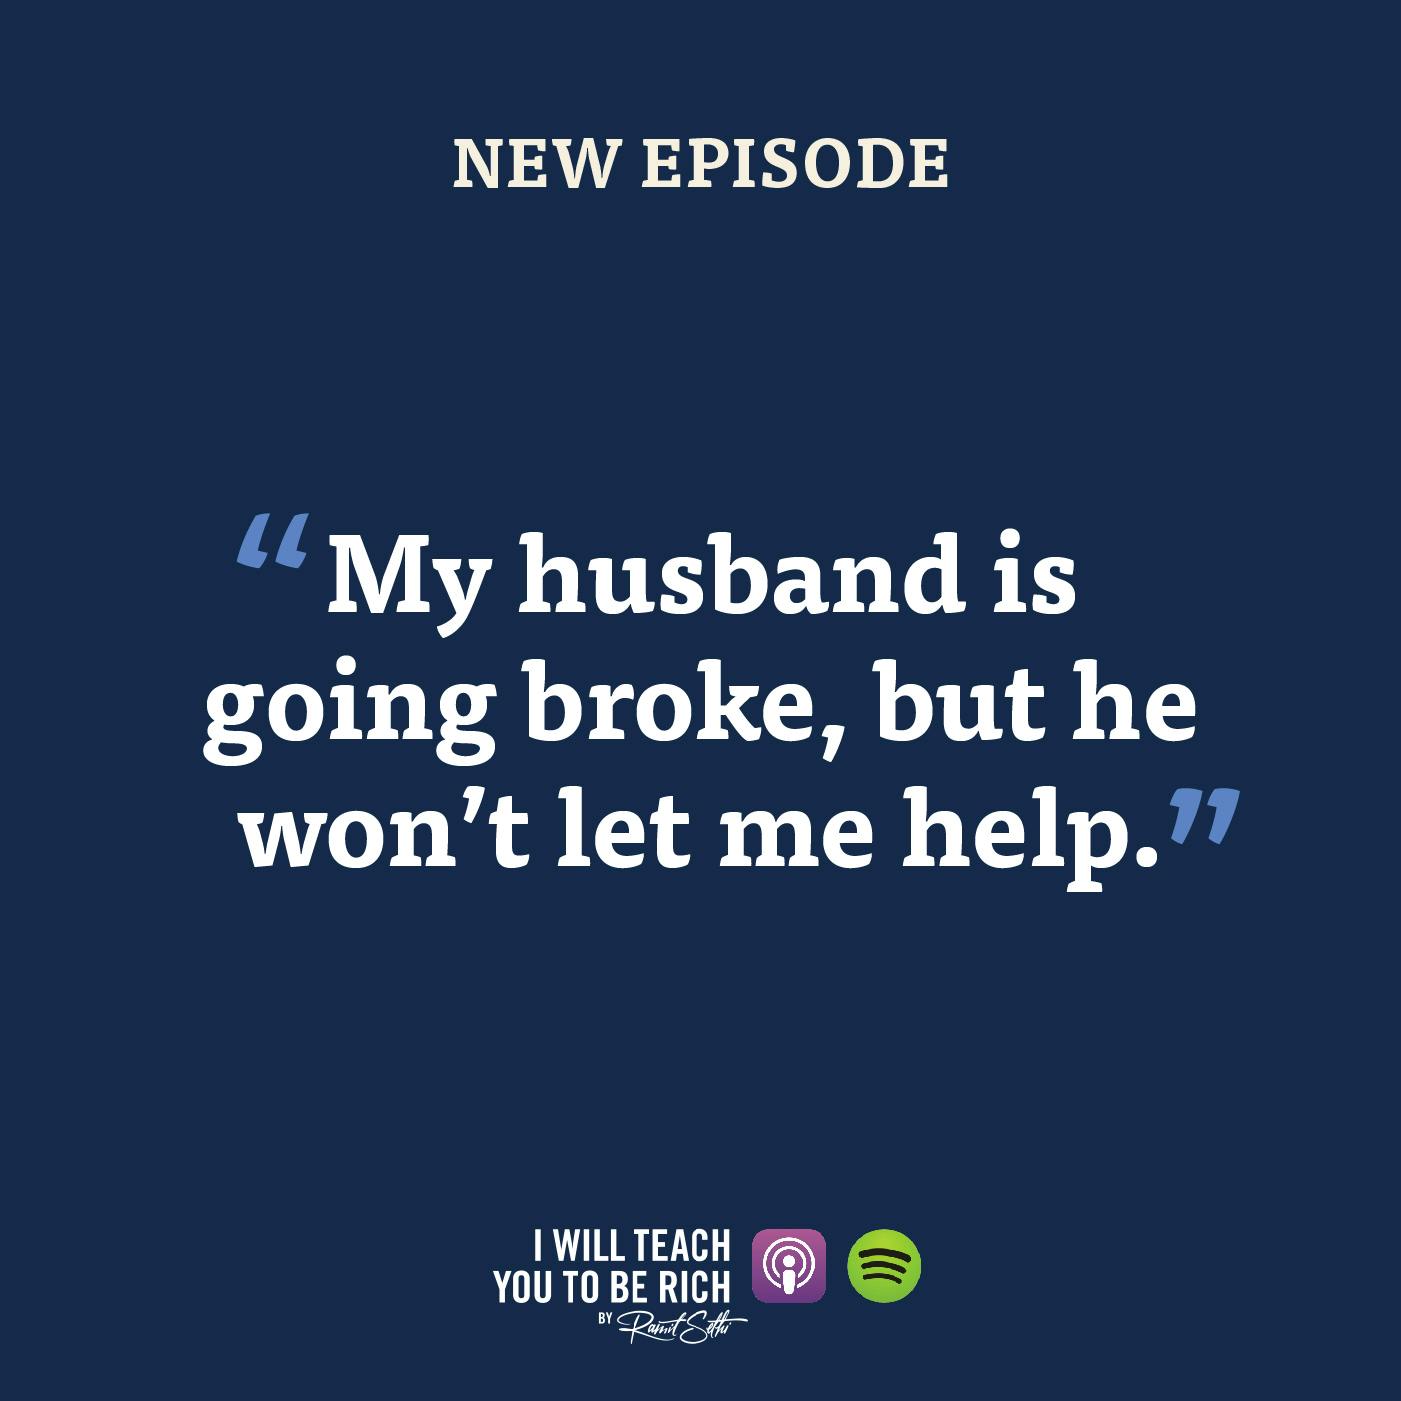 3. “My husband is going broke, but he won’t let me help”